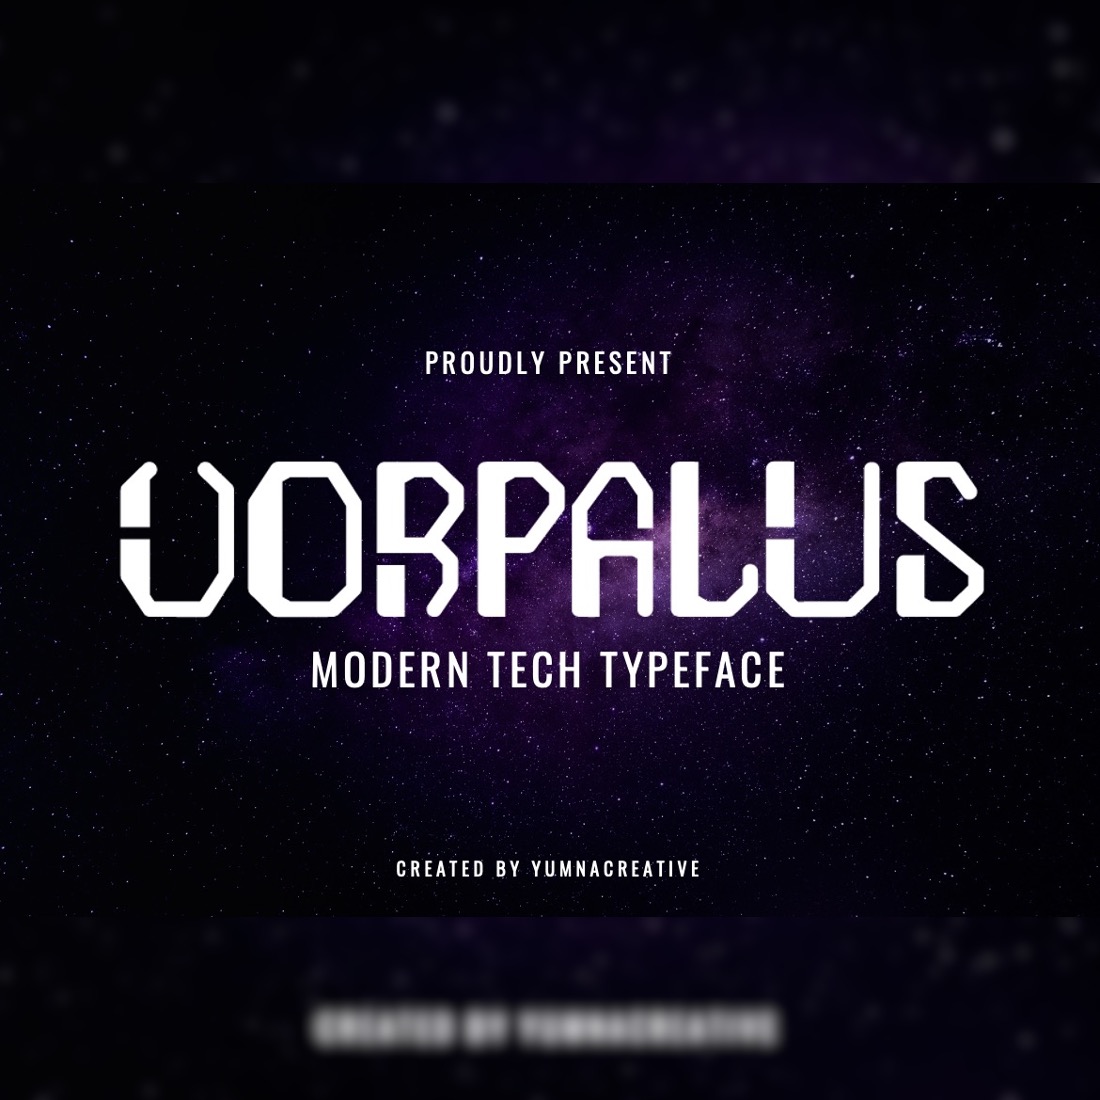 Vorpalus - Modern Tech Font preview image.